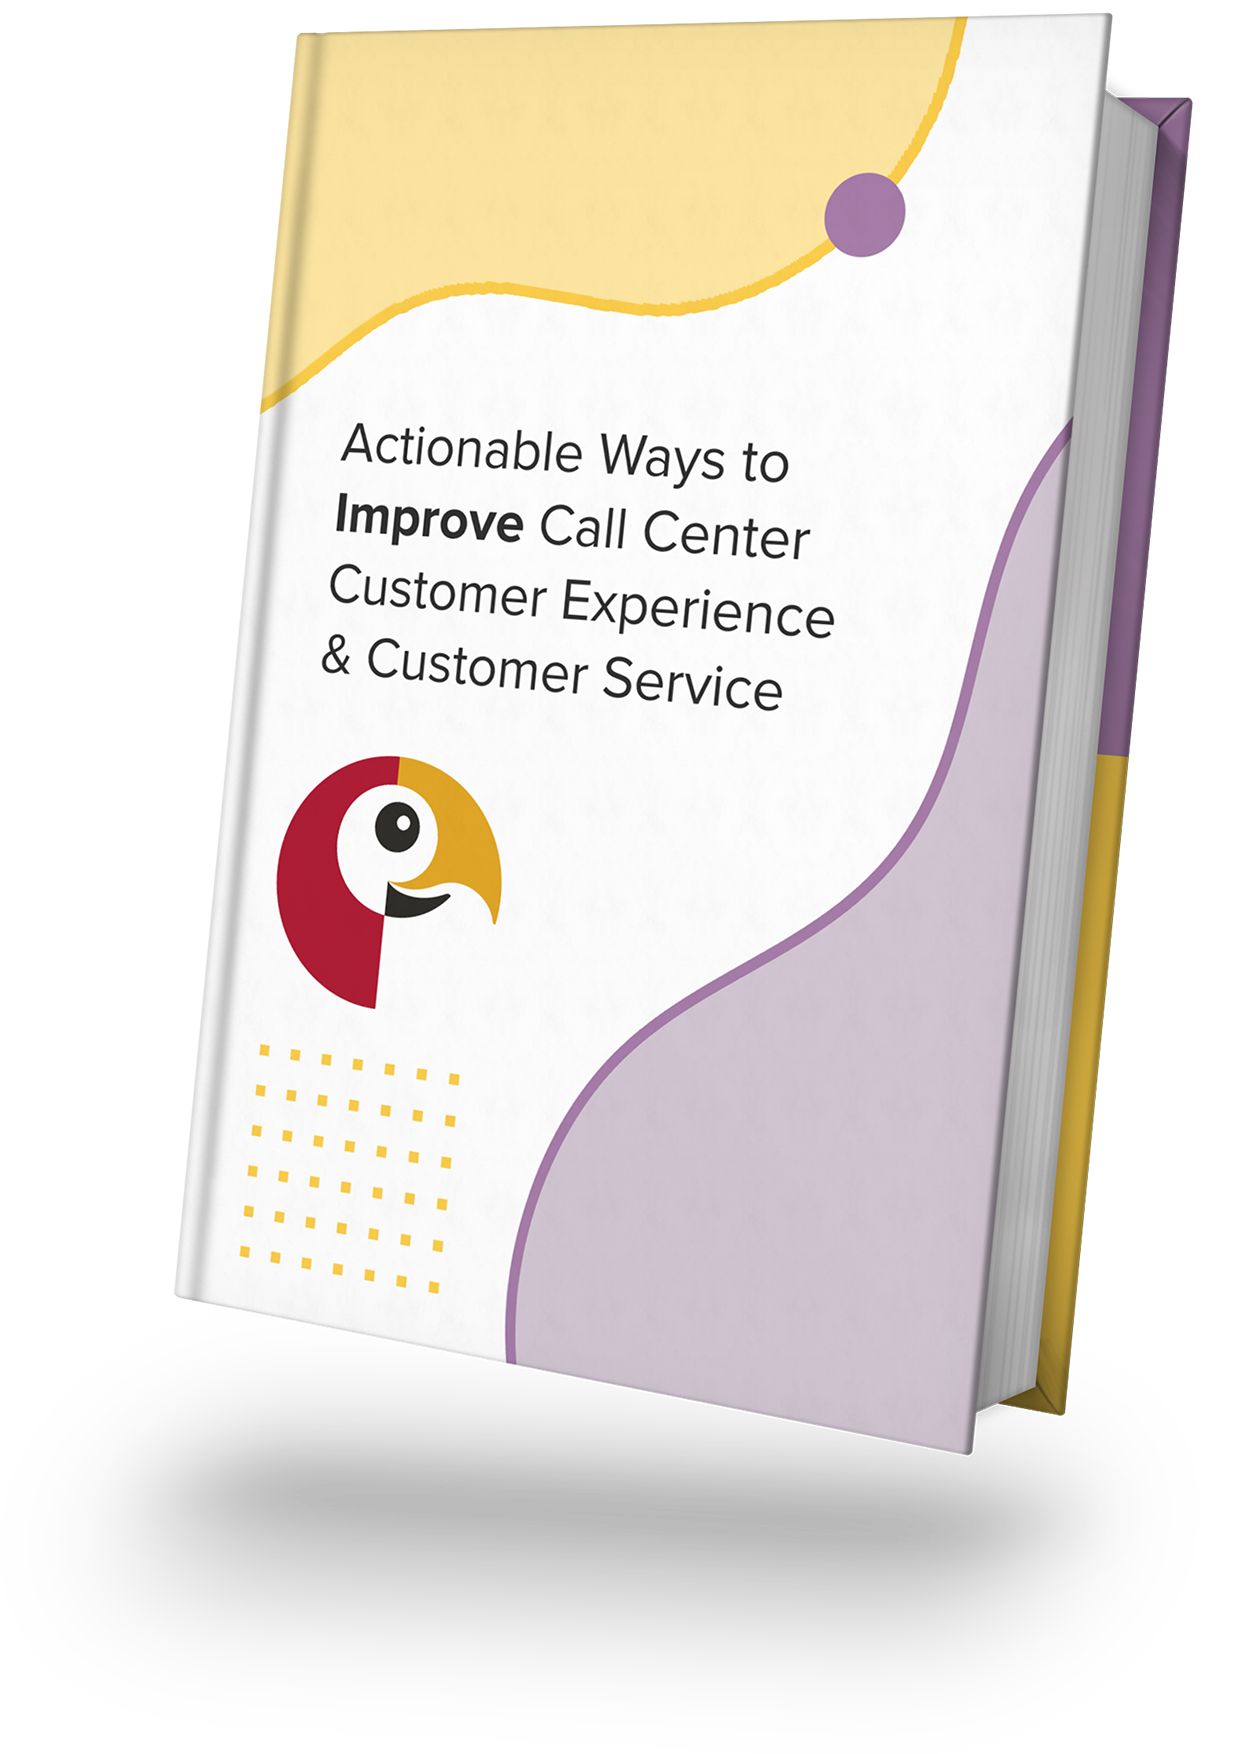 Actionable Ways to Improve Call Center Customer Experience & Customer Service book